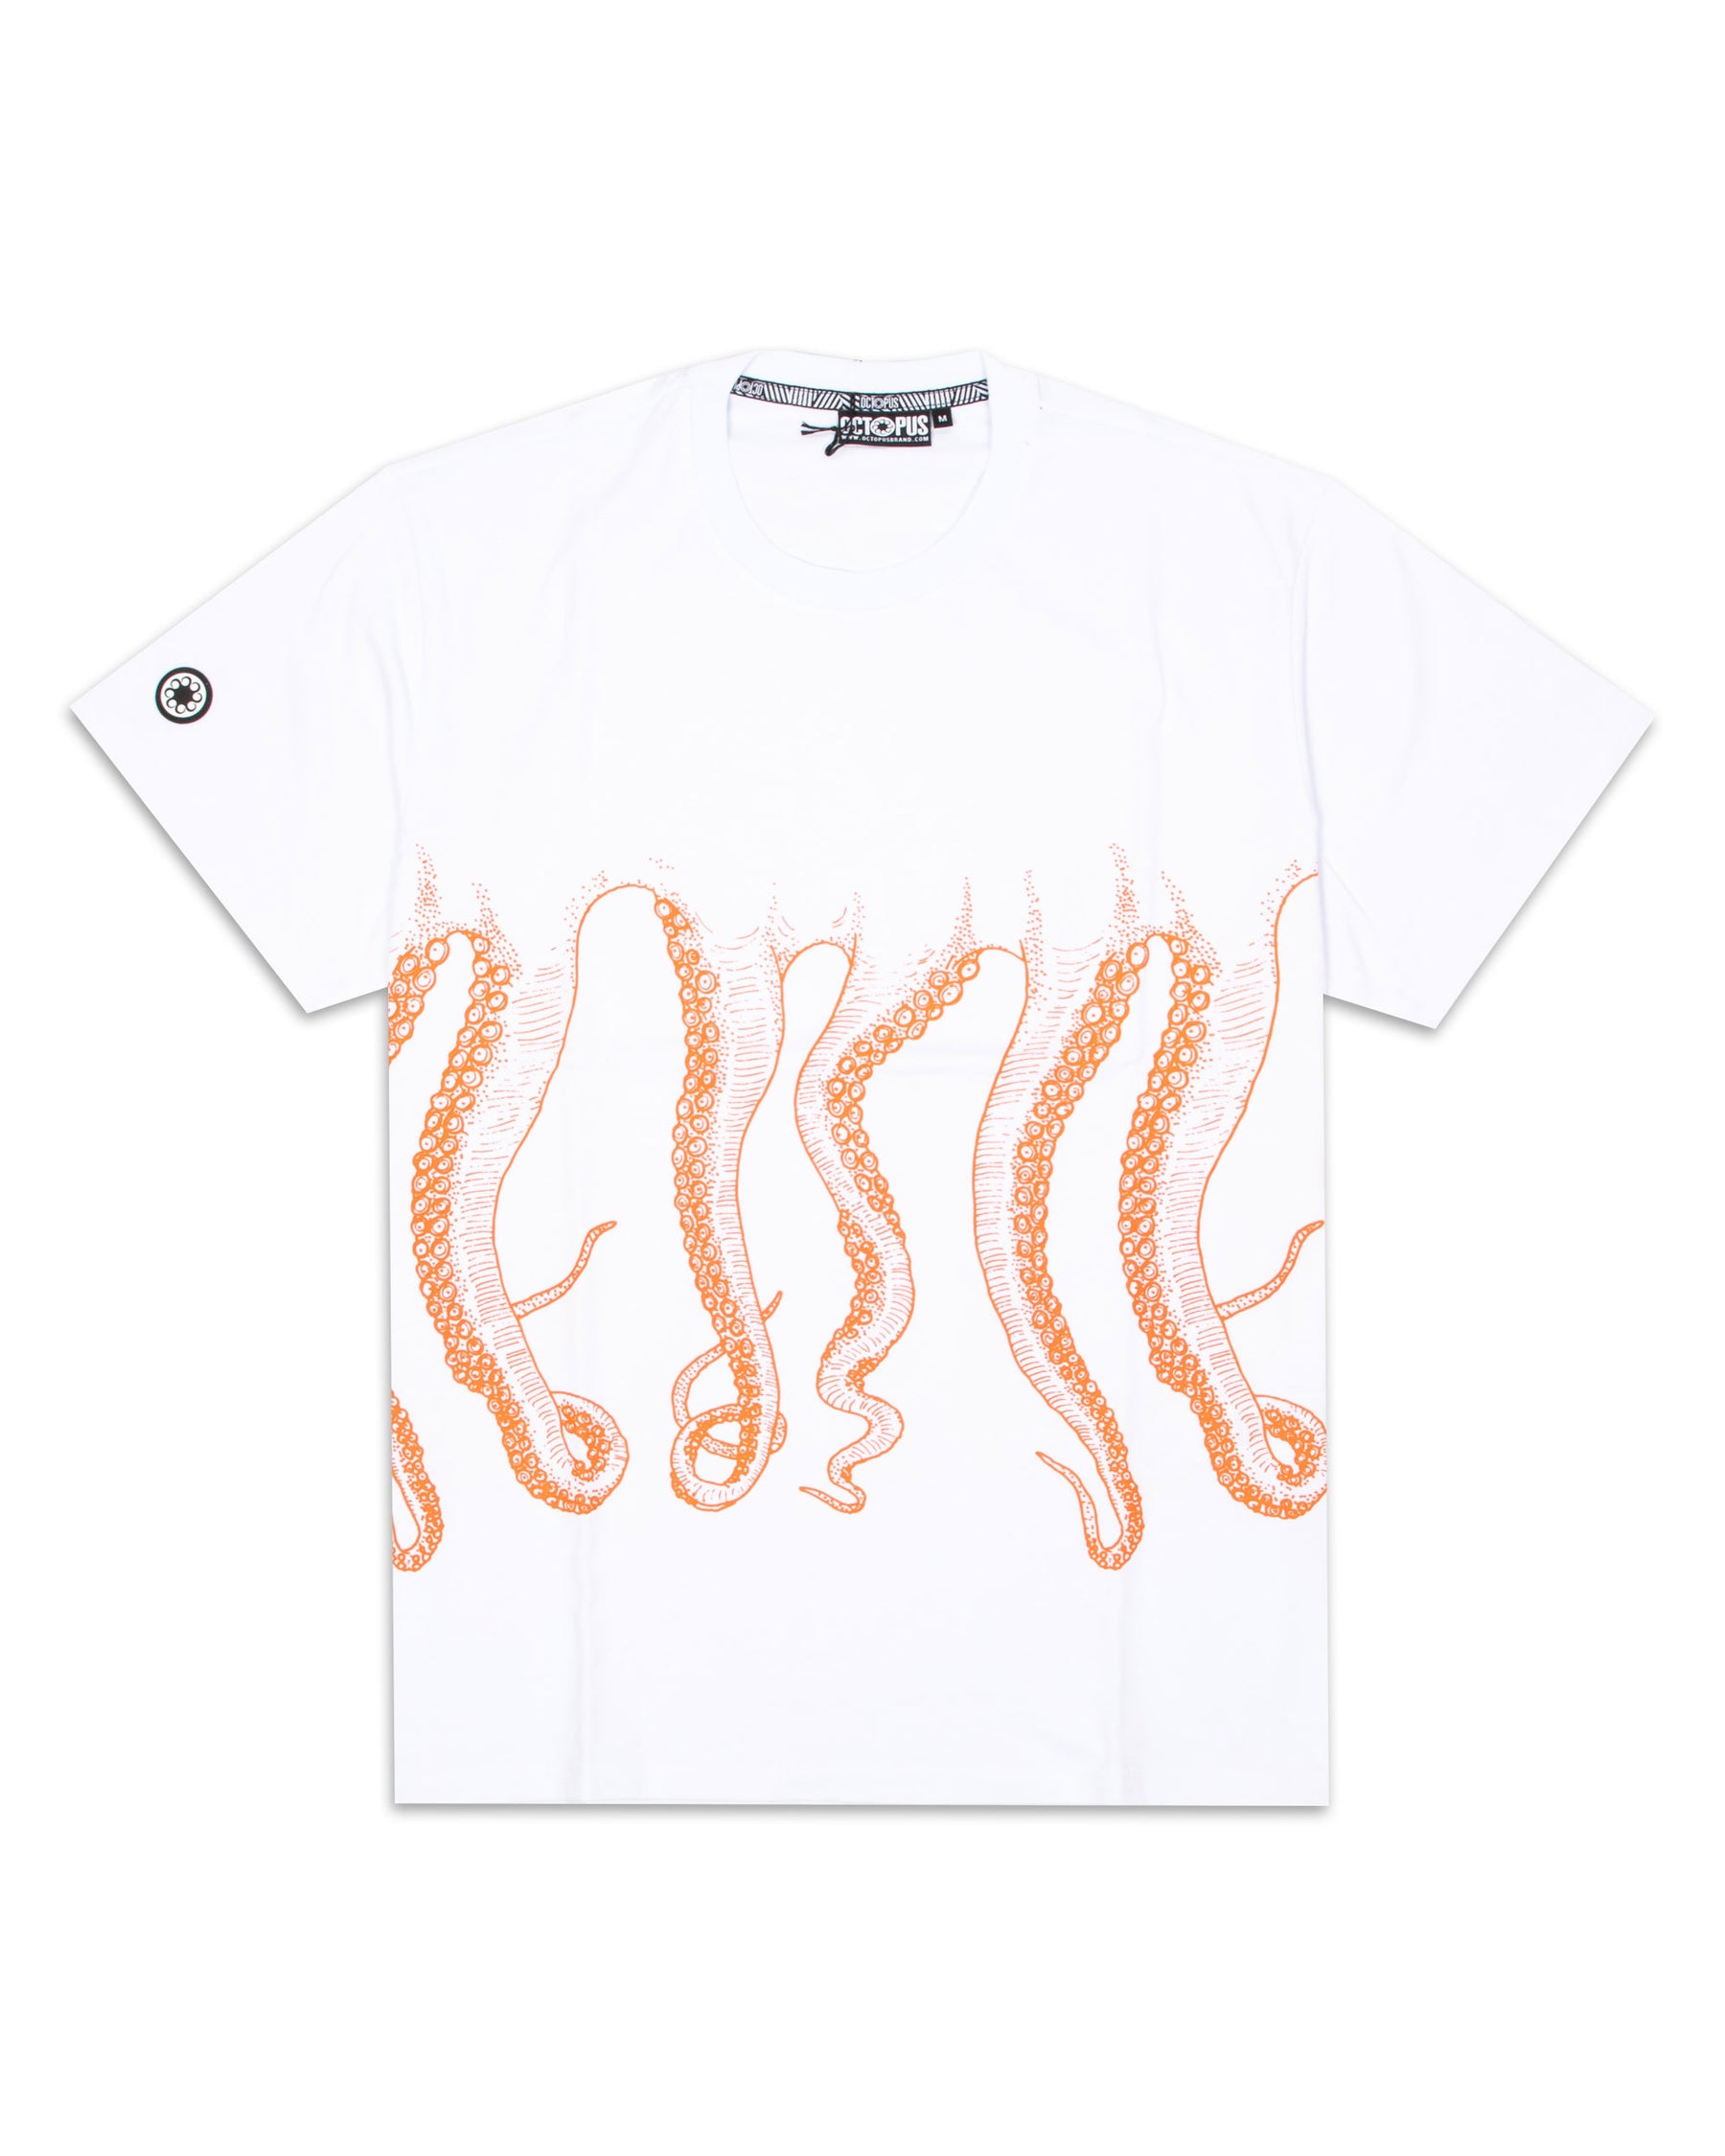 Octopus Outline Tee 22SOTS03-White